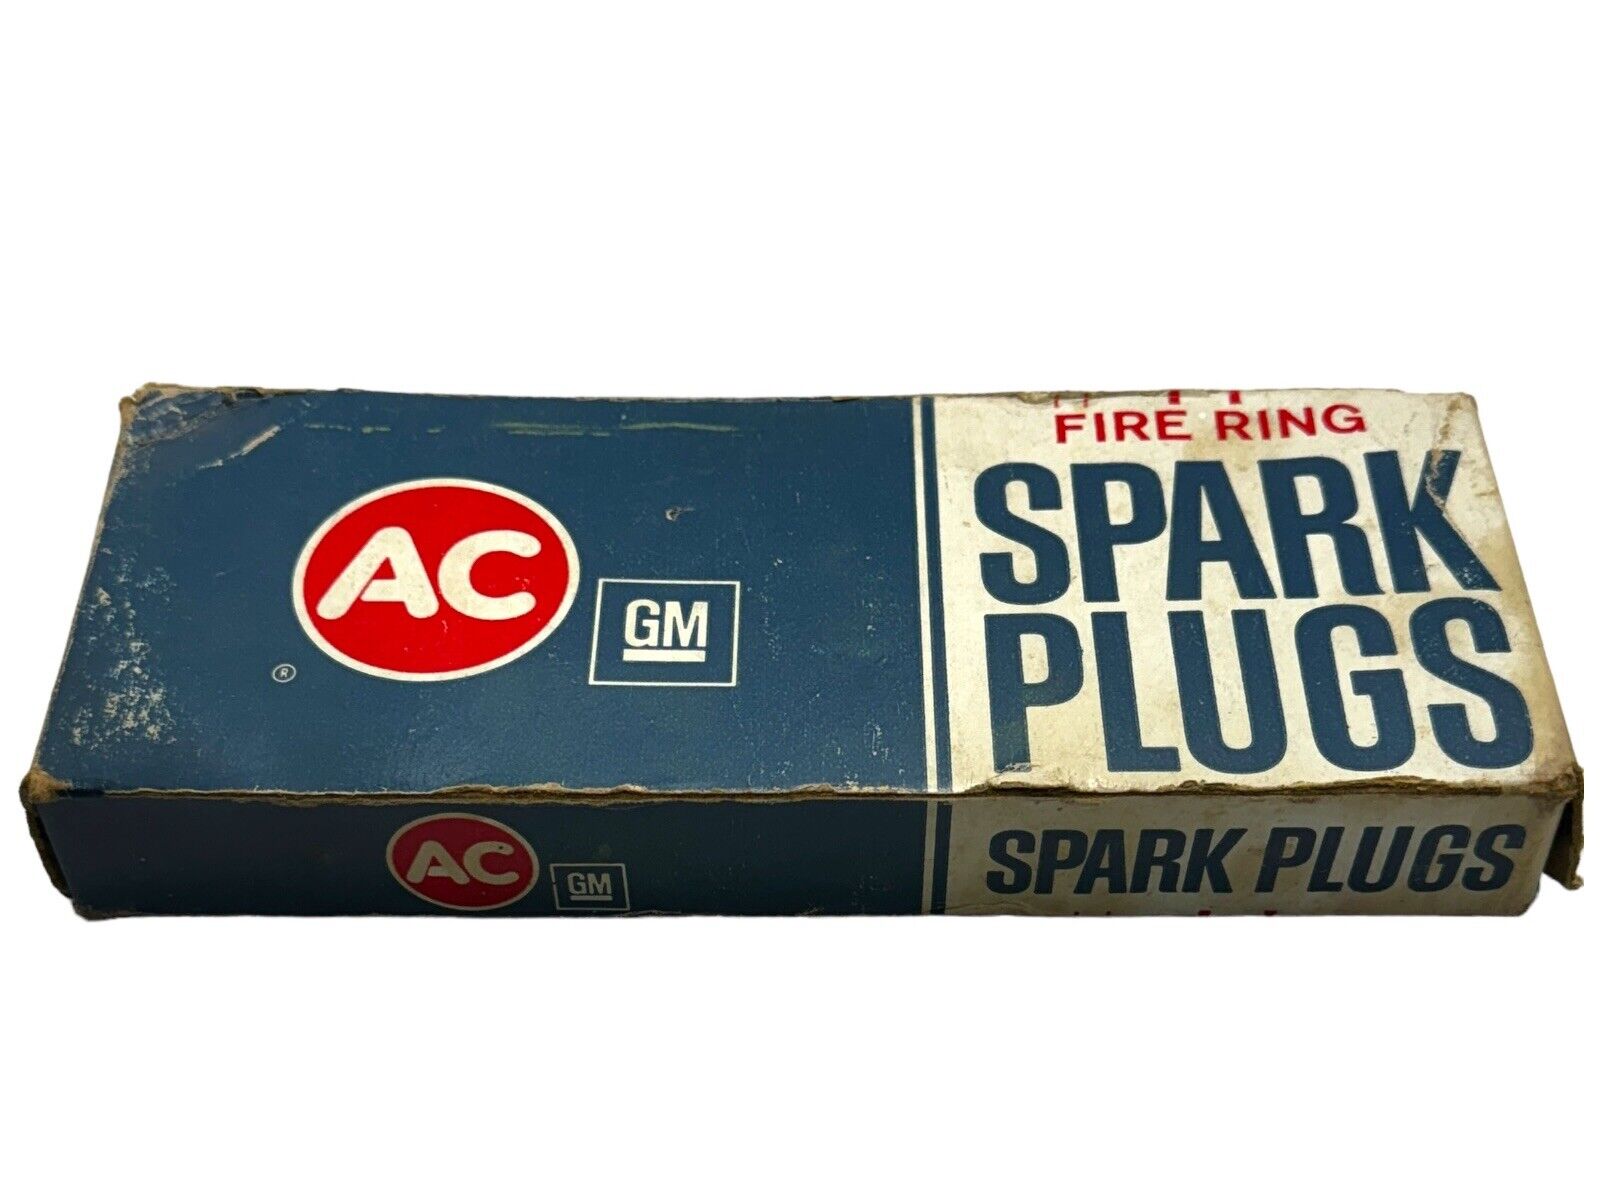 NOS AC DELCO Spark Plugs 8 FIRE RING 84TS 5612150 Made In USA